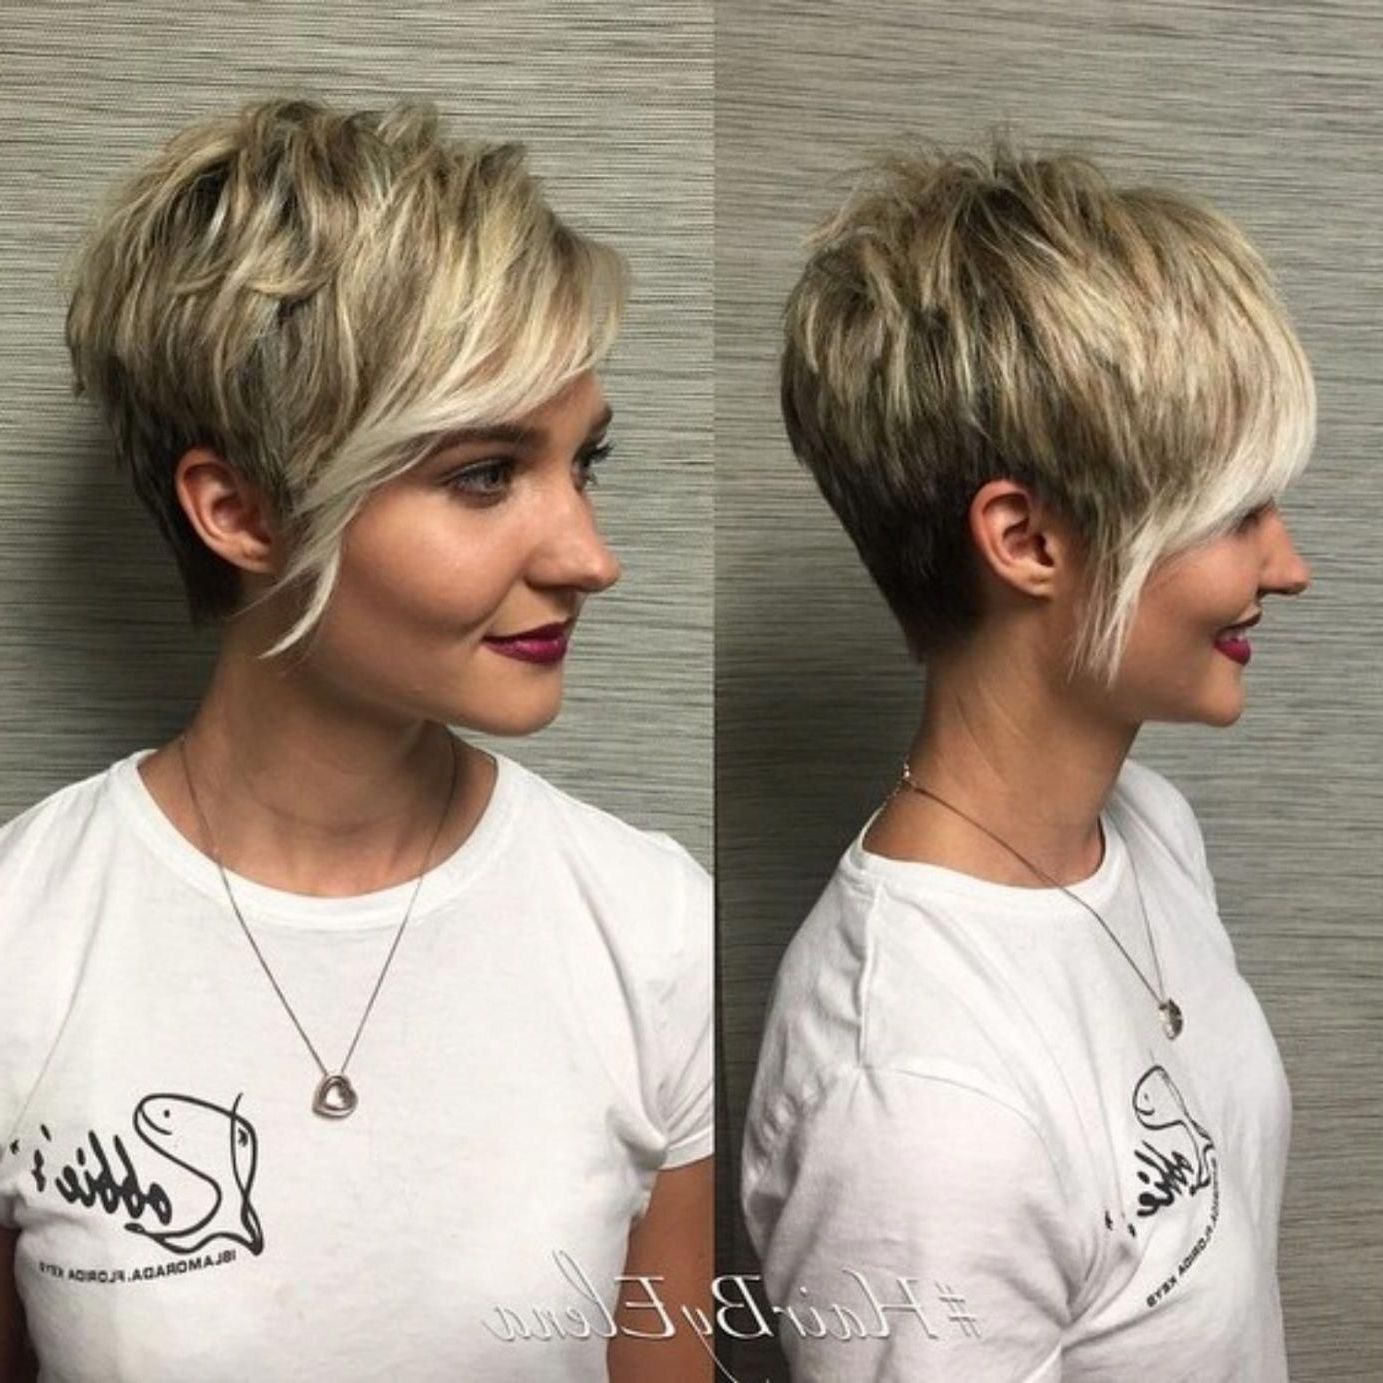 Edgy Asymmetrical Haircut #shortpixie In 2020 Regarding Widely Used Asymmetrical Pixie Hairstyles With Pops Of Color (Gallery 20 of 20)